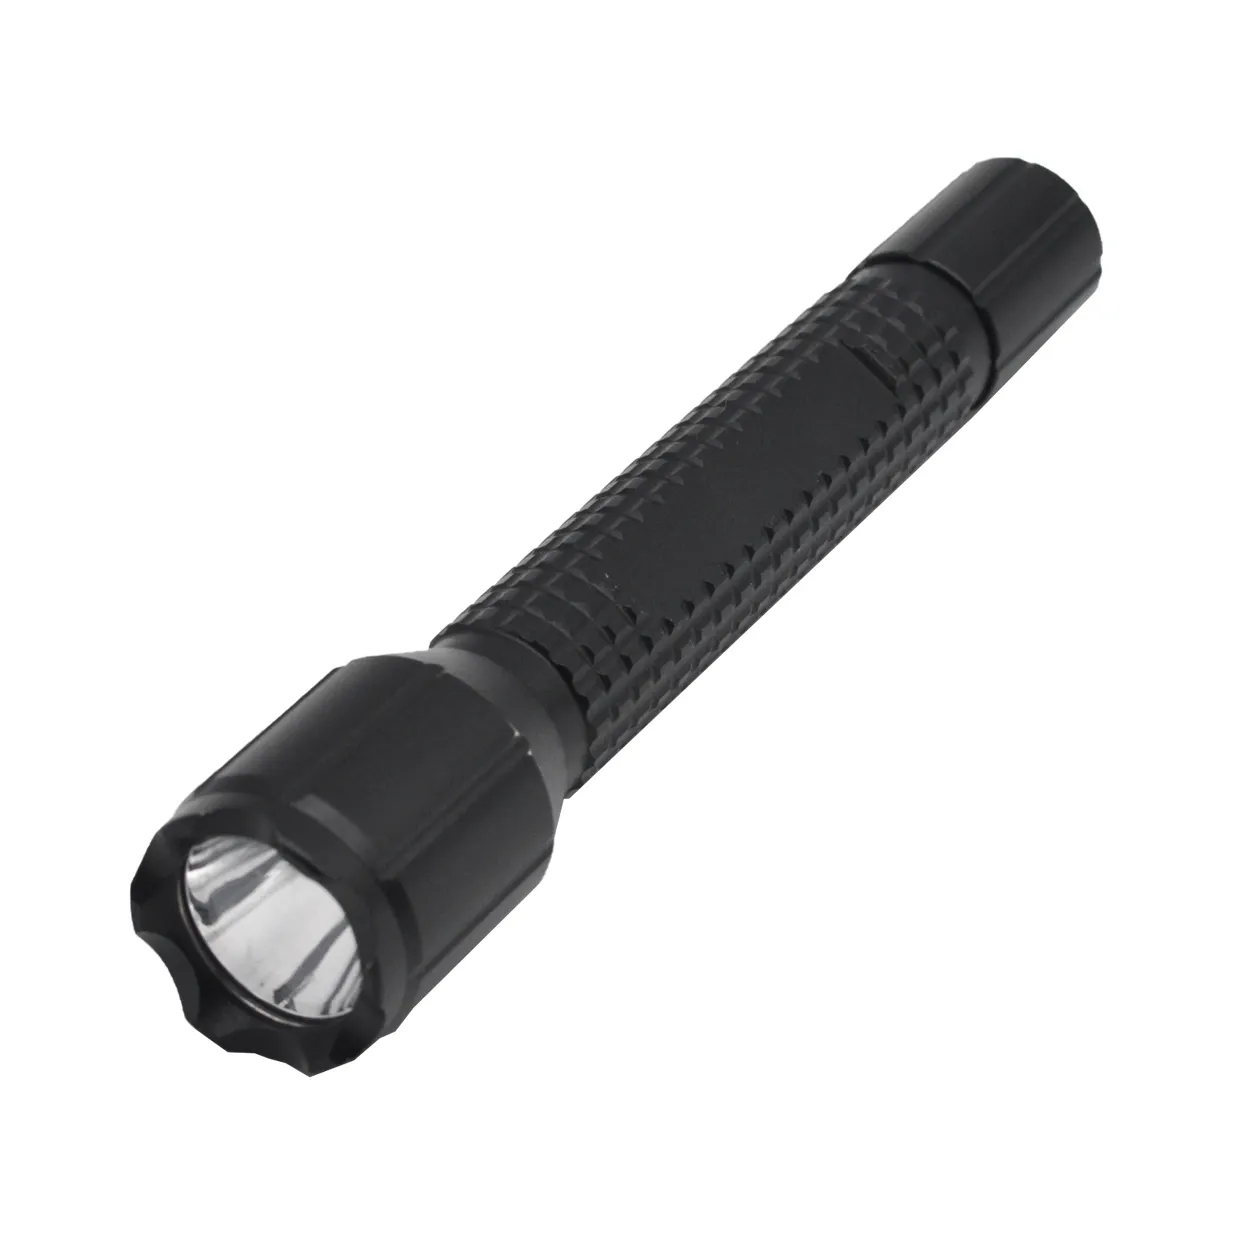 Factory Wholesale Hot Selling Mini LED Flashlight Waterproof Used for House, Camping, and other activity 2XAA Battery